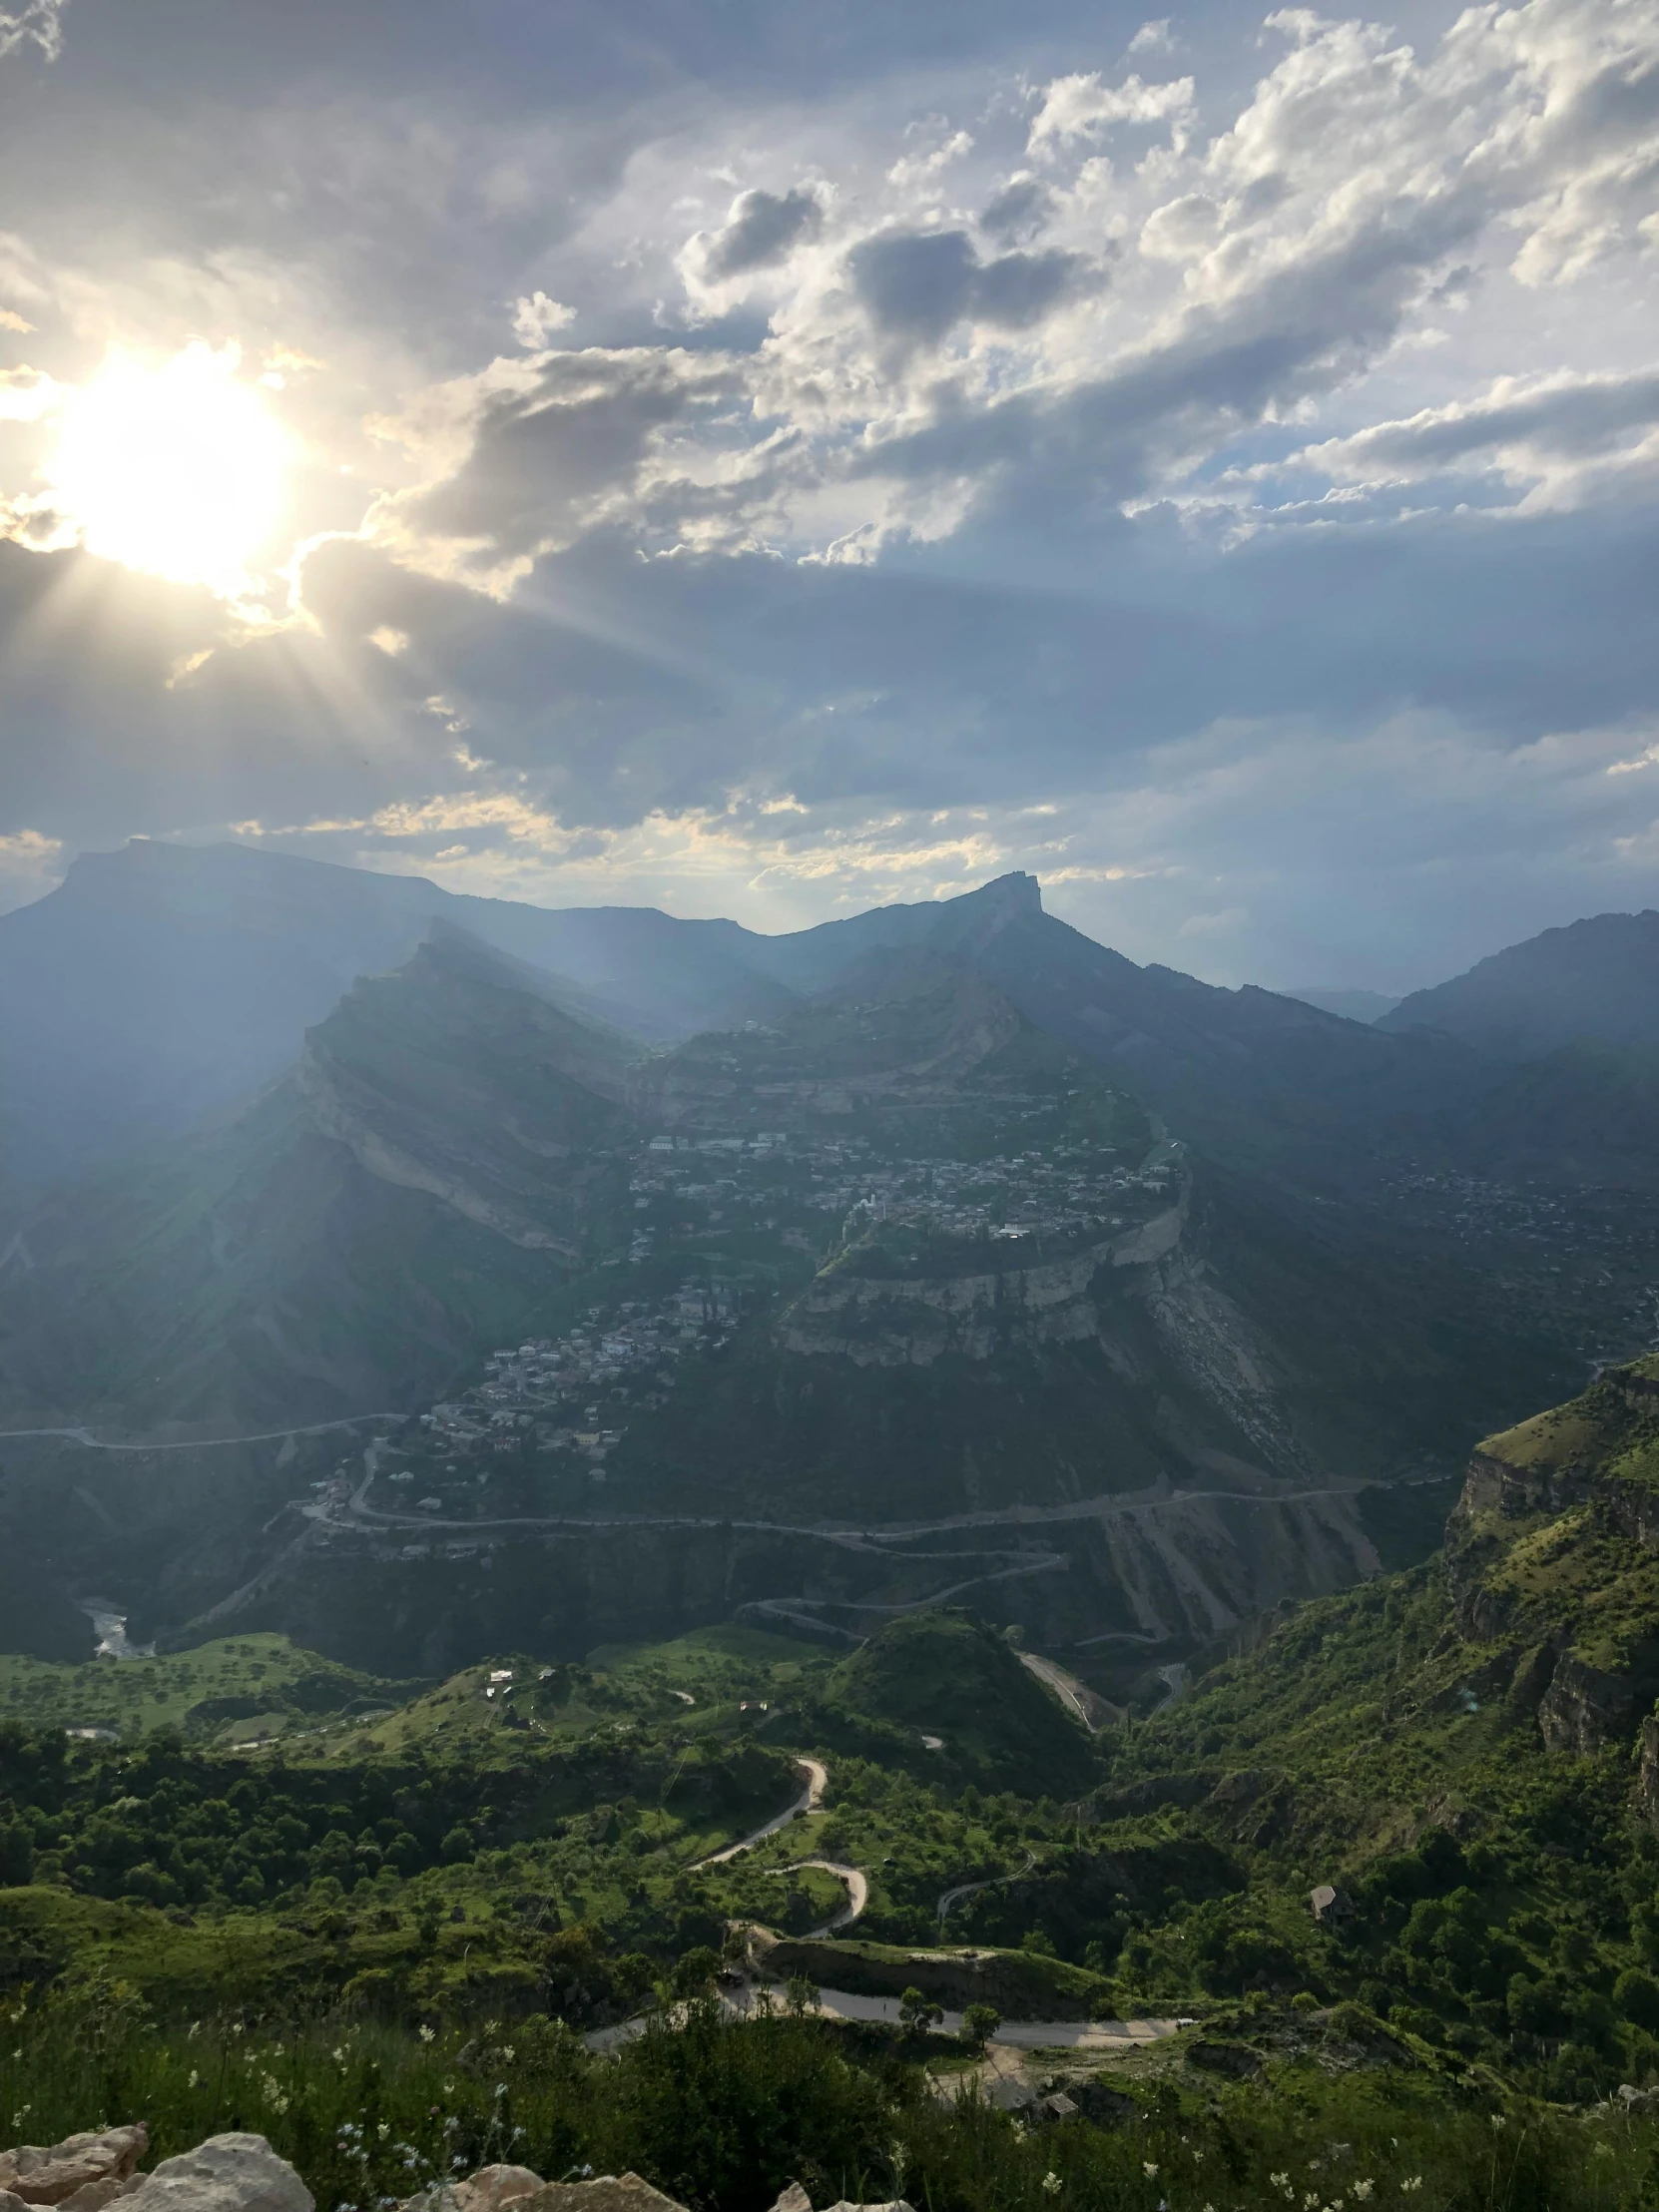 the sun shines bright over a valley in a mountainous region